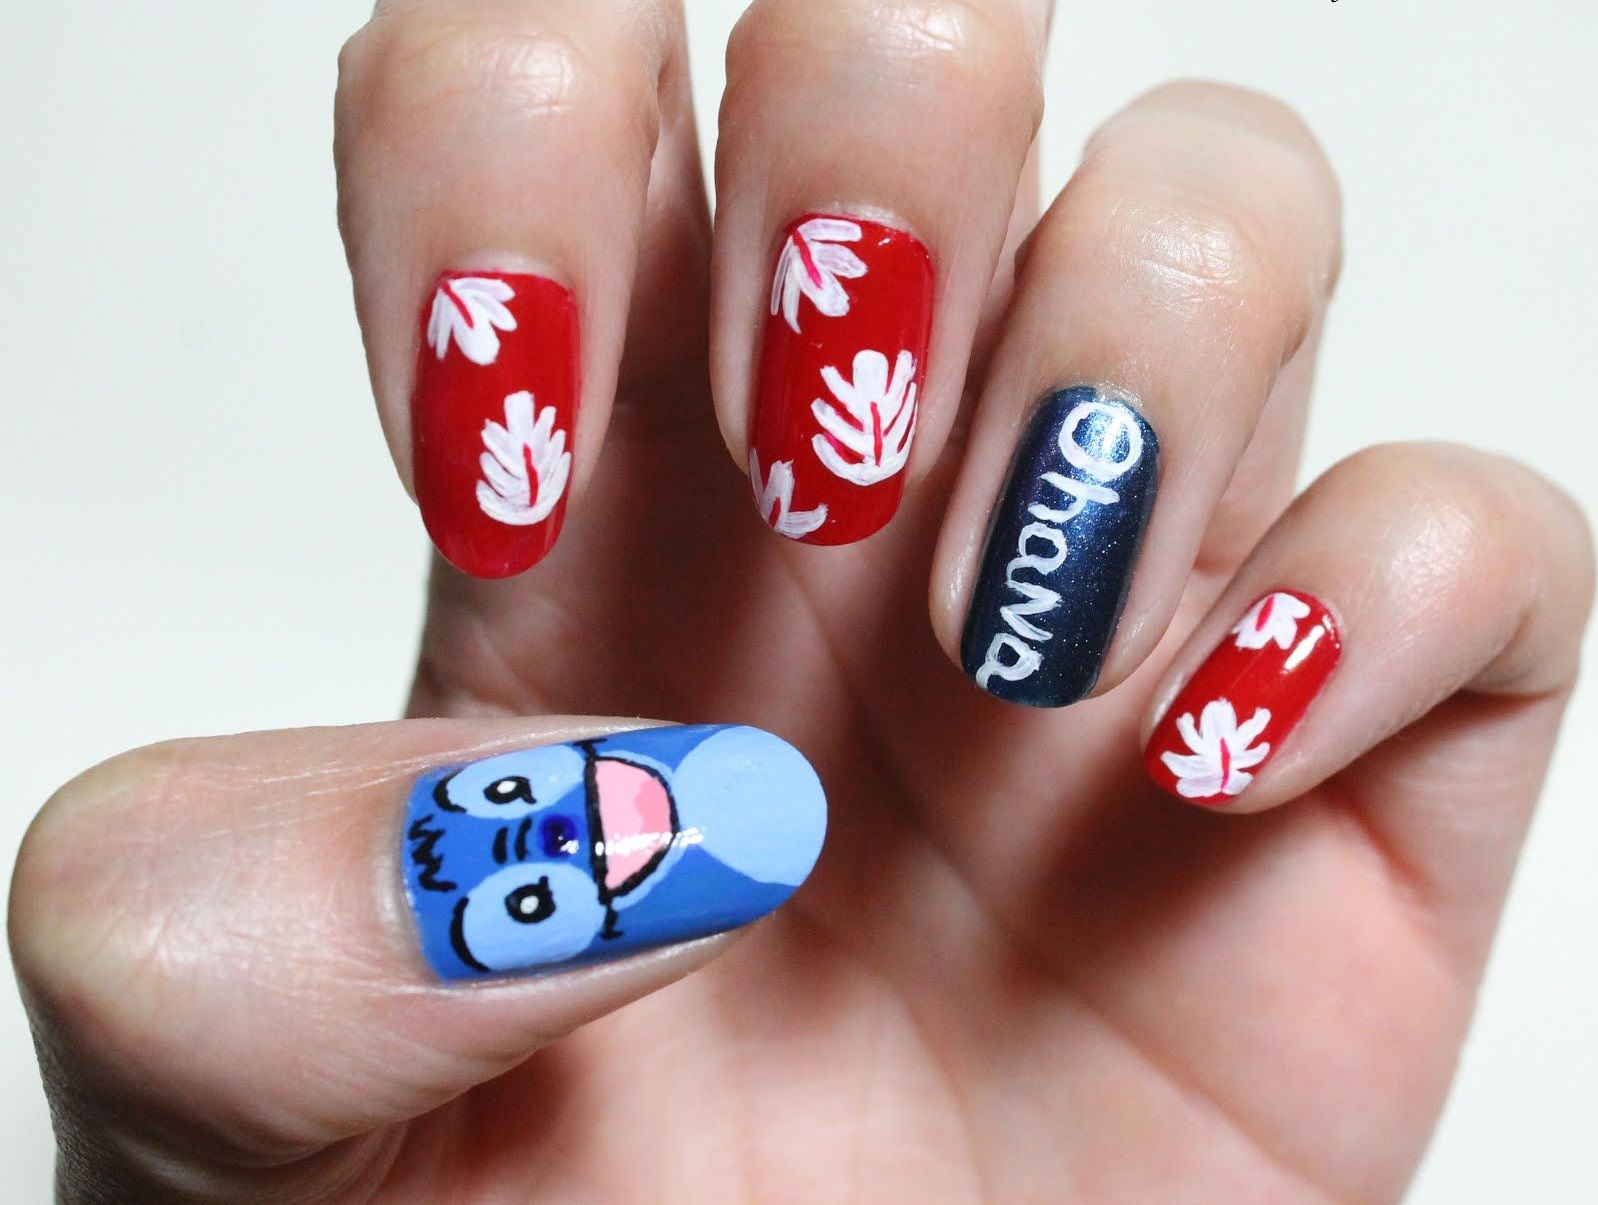 Lilo-and-Stitch-Nail-Design-2 70+ Magical Disney Nail Designs That Look Cute